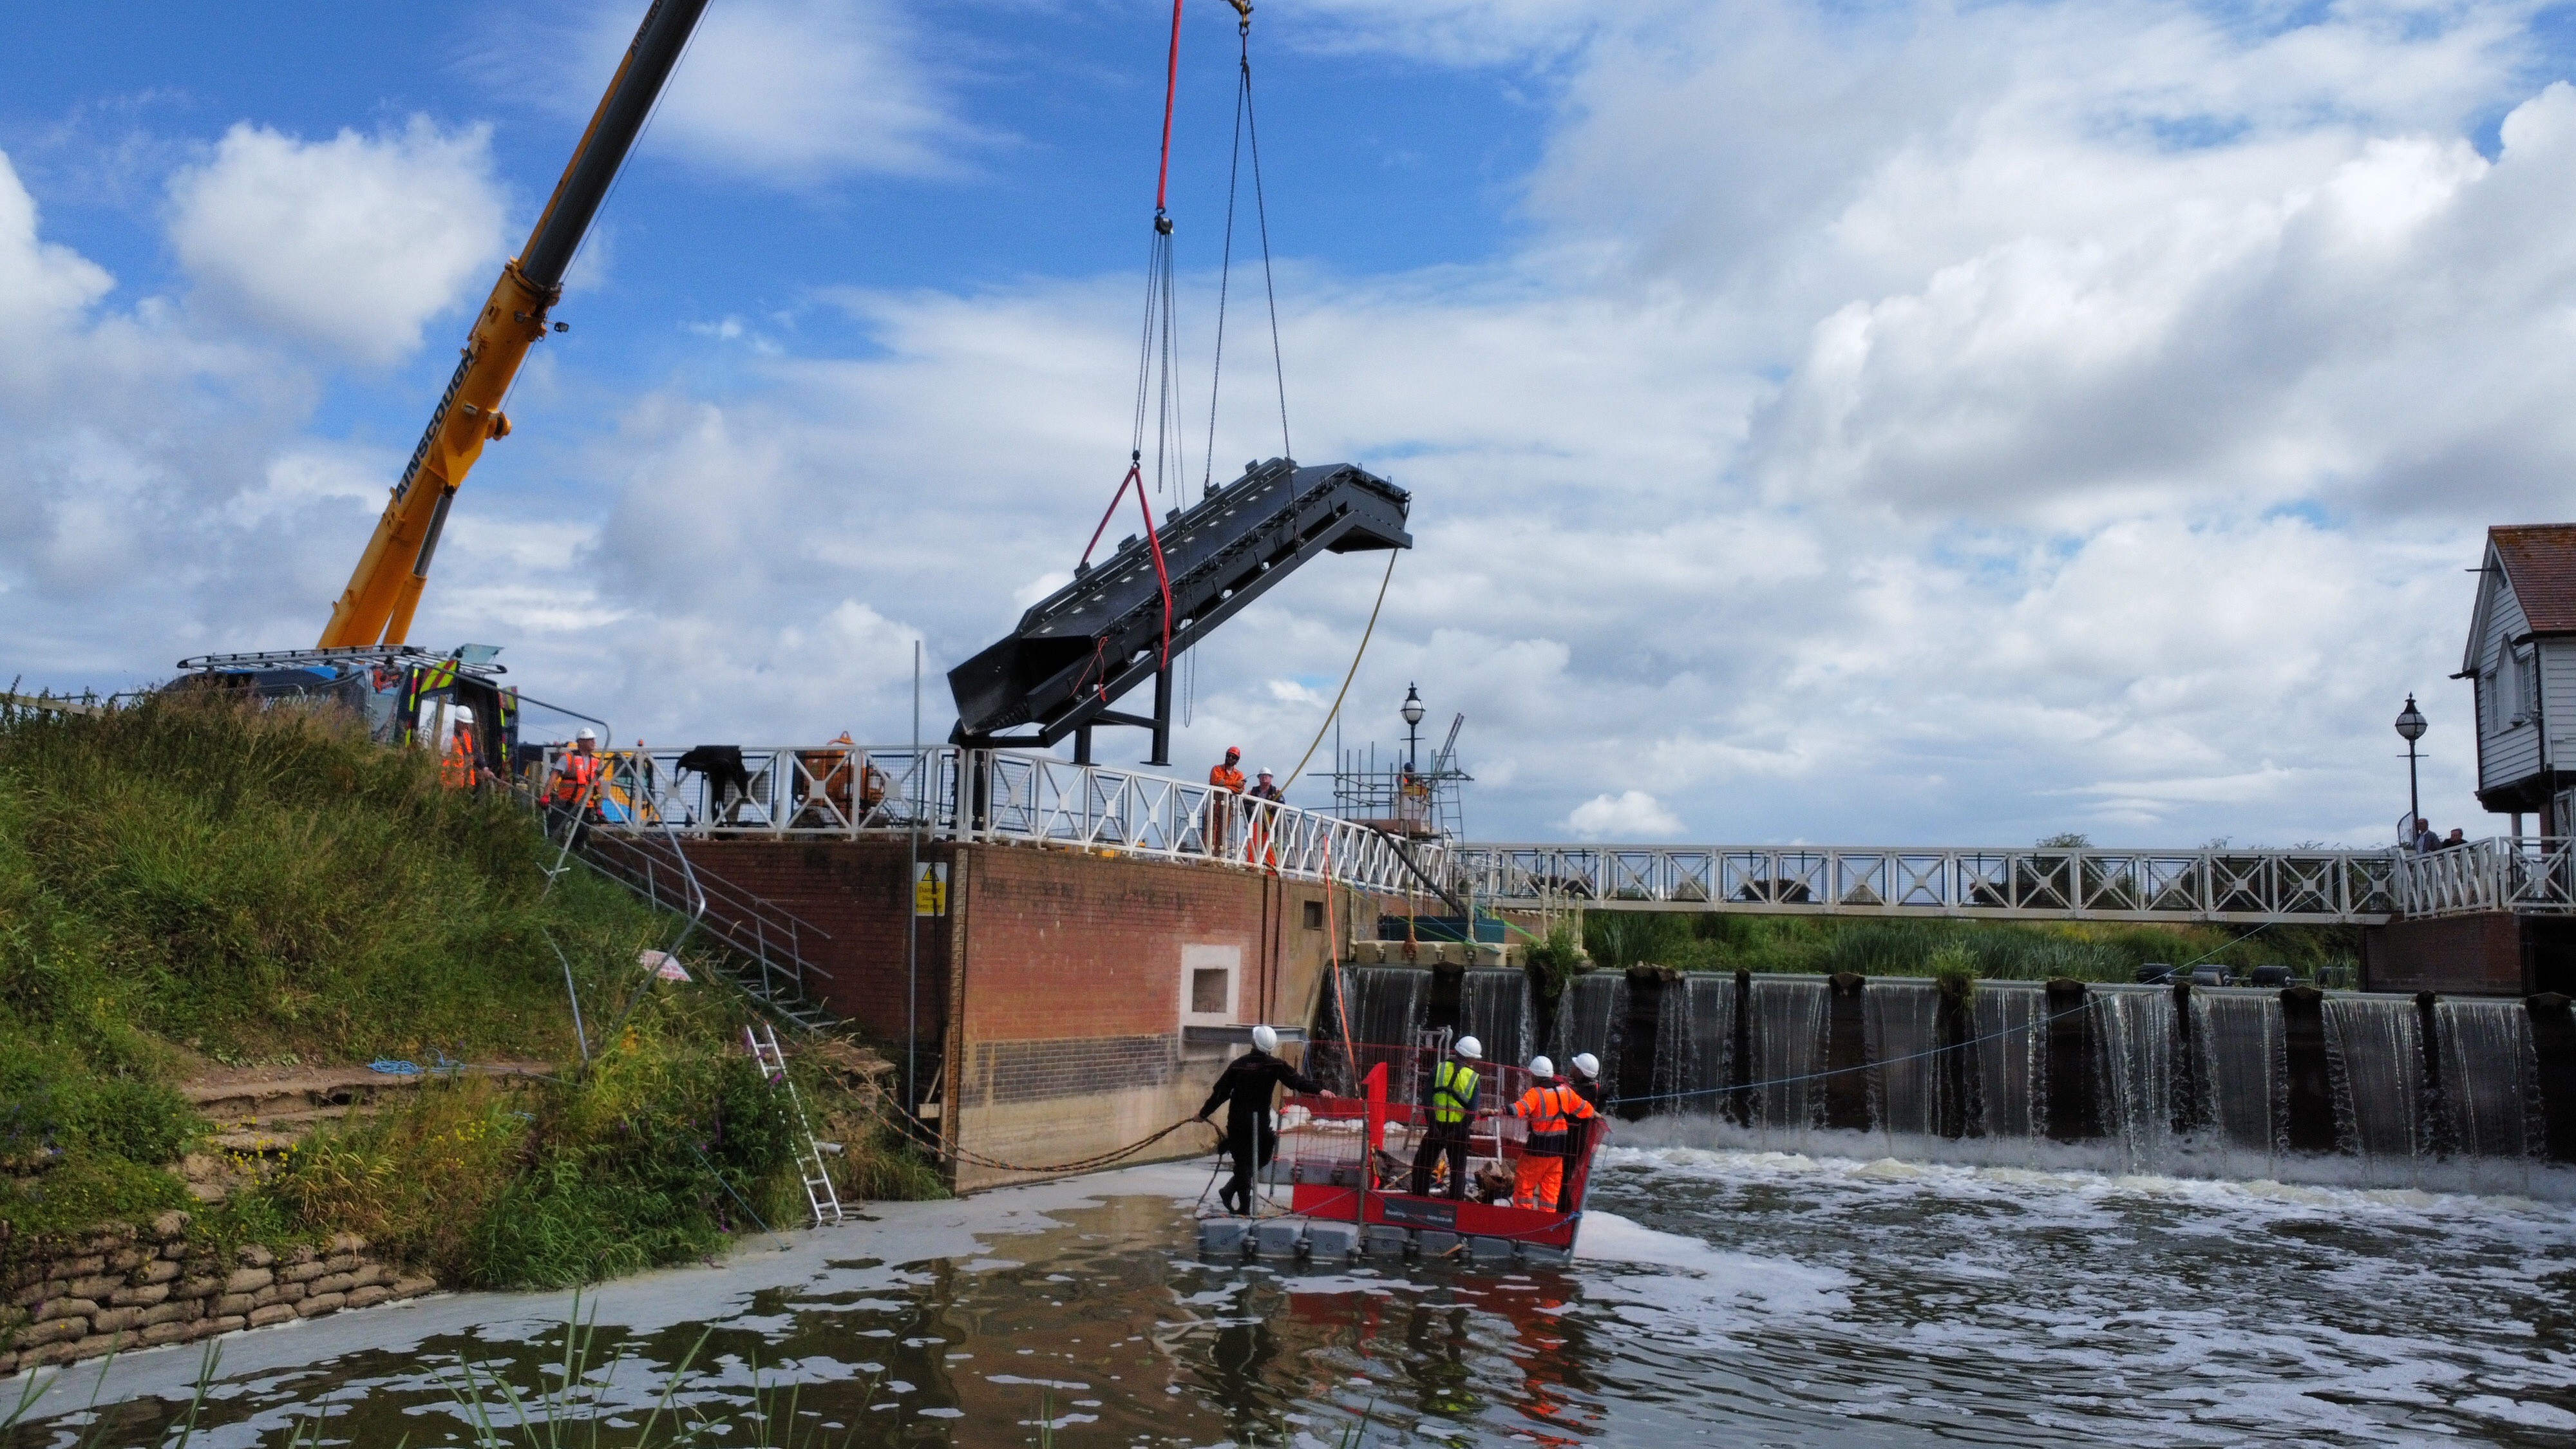 Eel pass being lifted into position